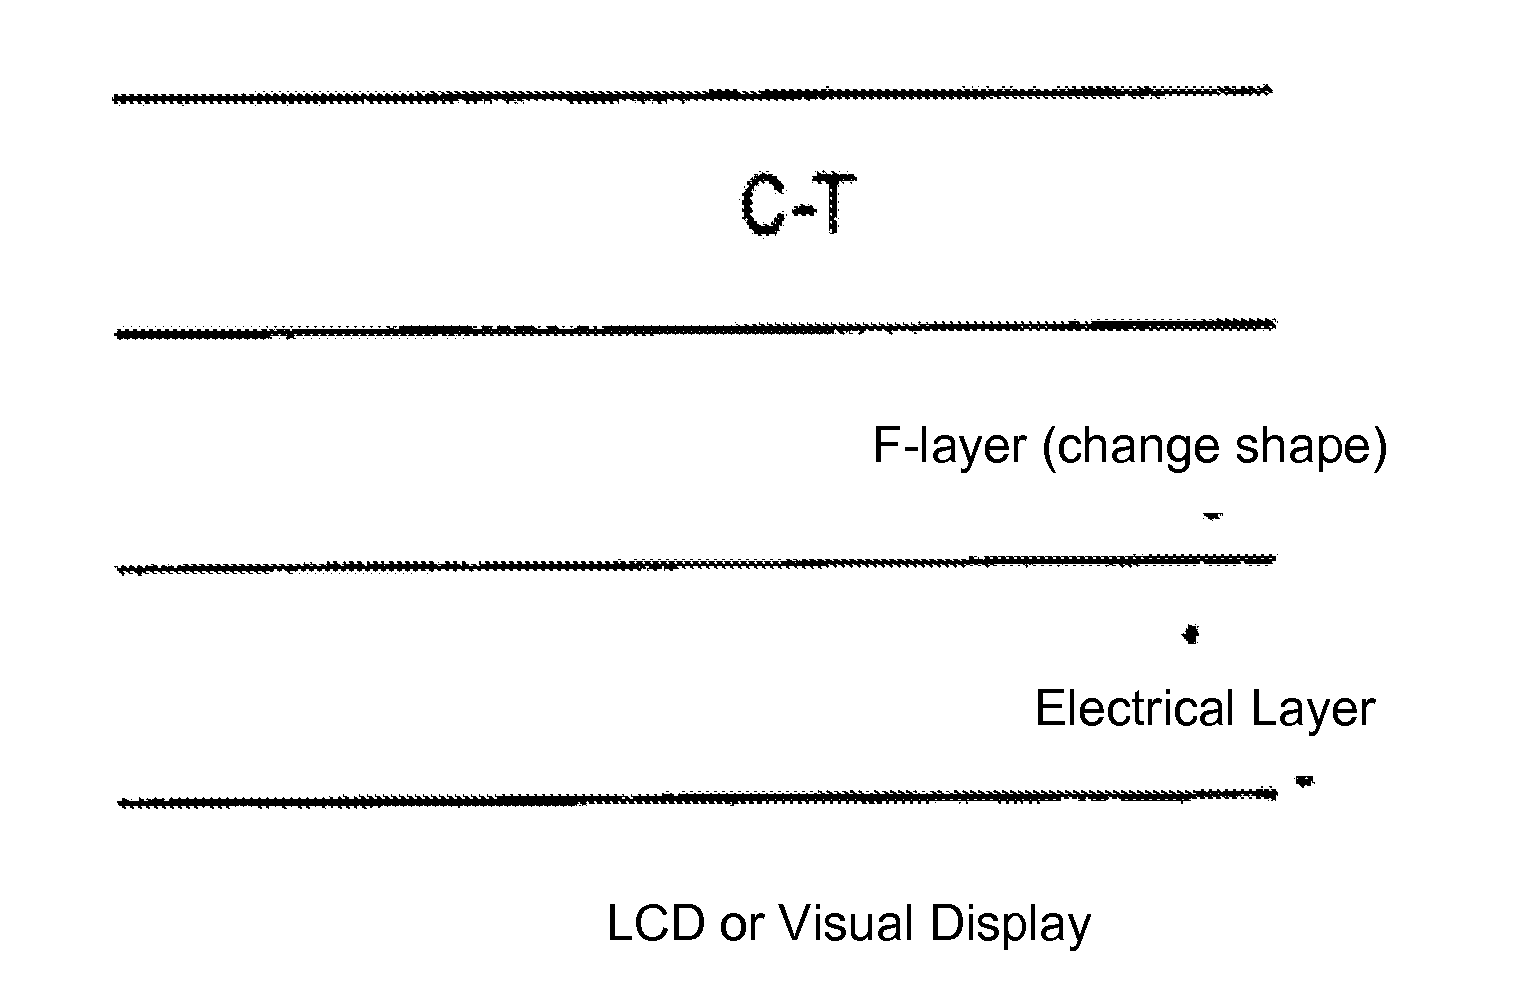 Reconfigurable tactile-enhanced display including "tap-and-drop" computing system for vision impaired users